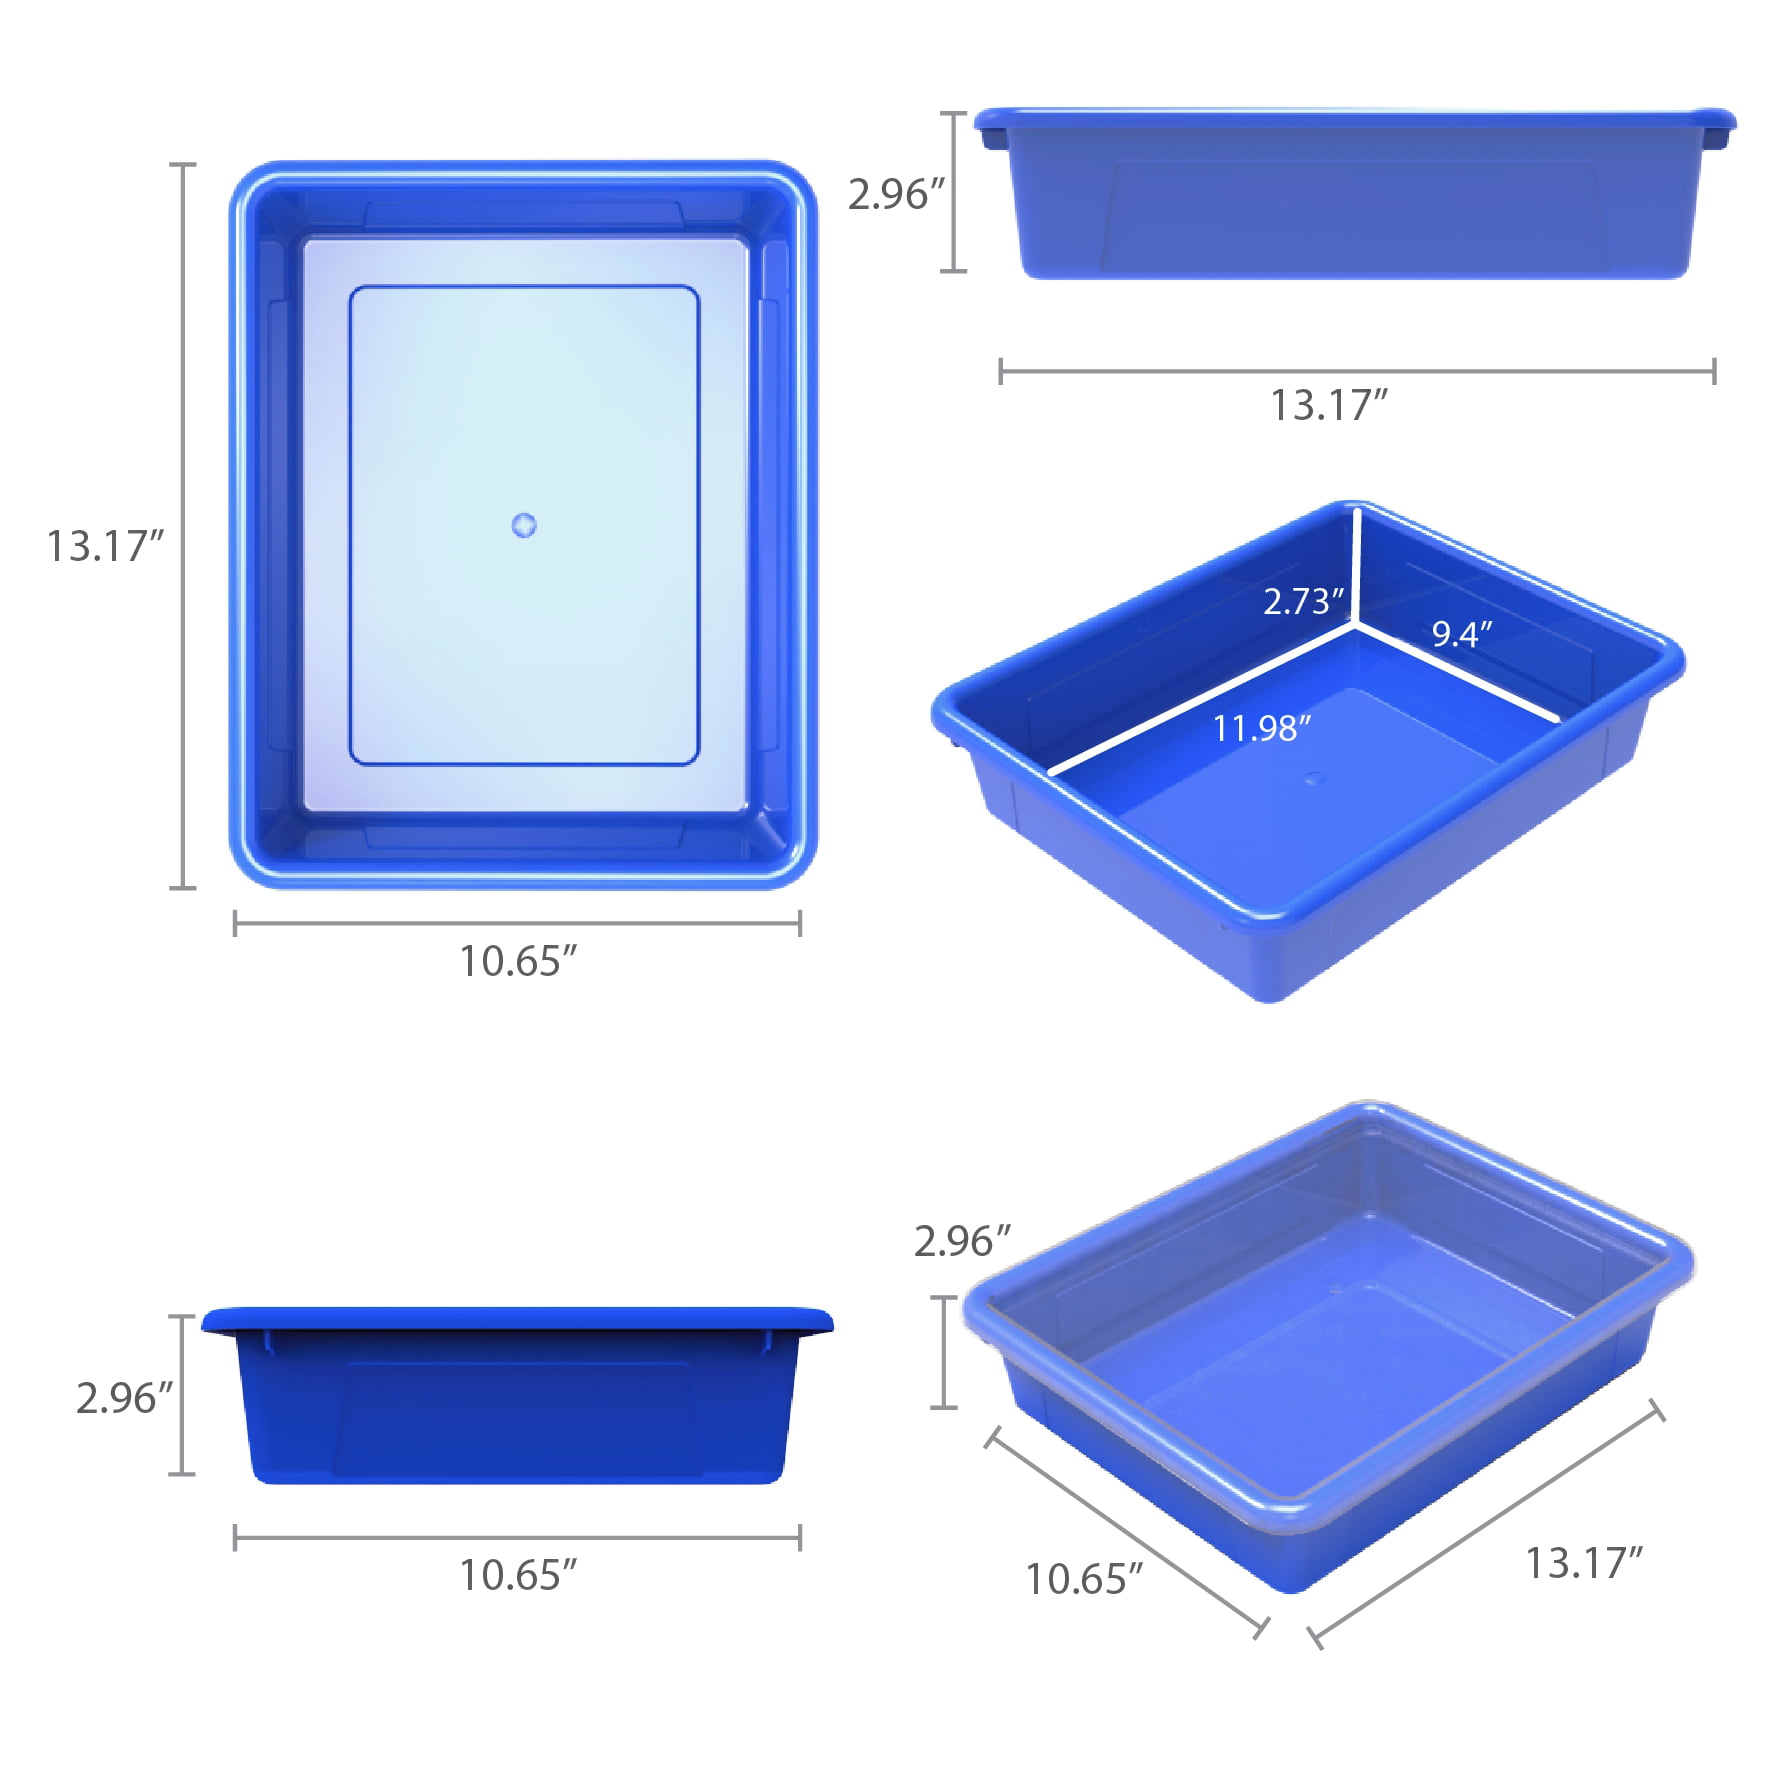 Storage Tray, Letter size, 10-3/4 x 13-1/4 x 3 Inches, Assorted Colors, Pack of 5 School Smart